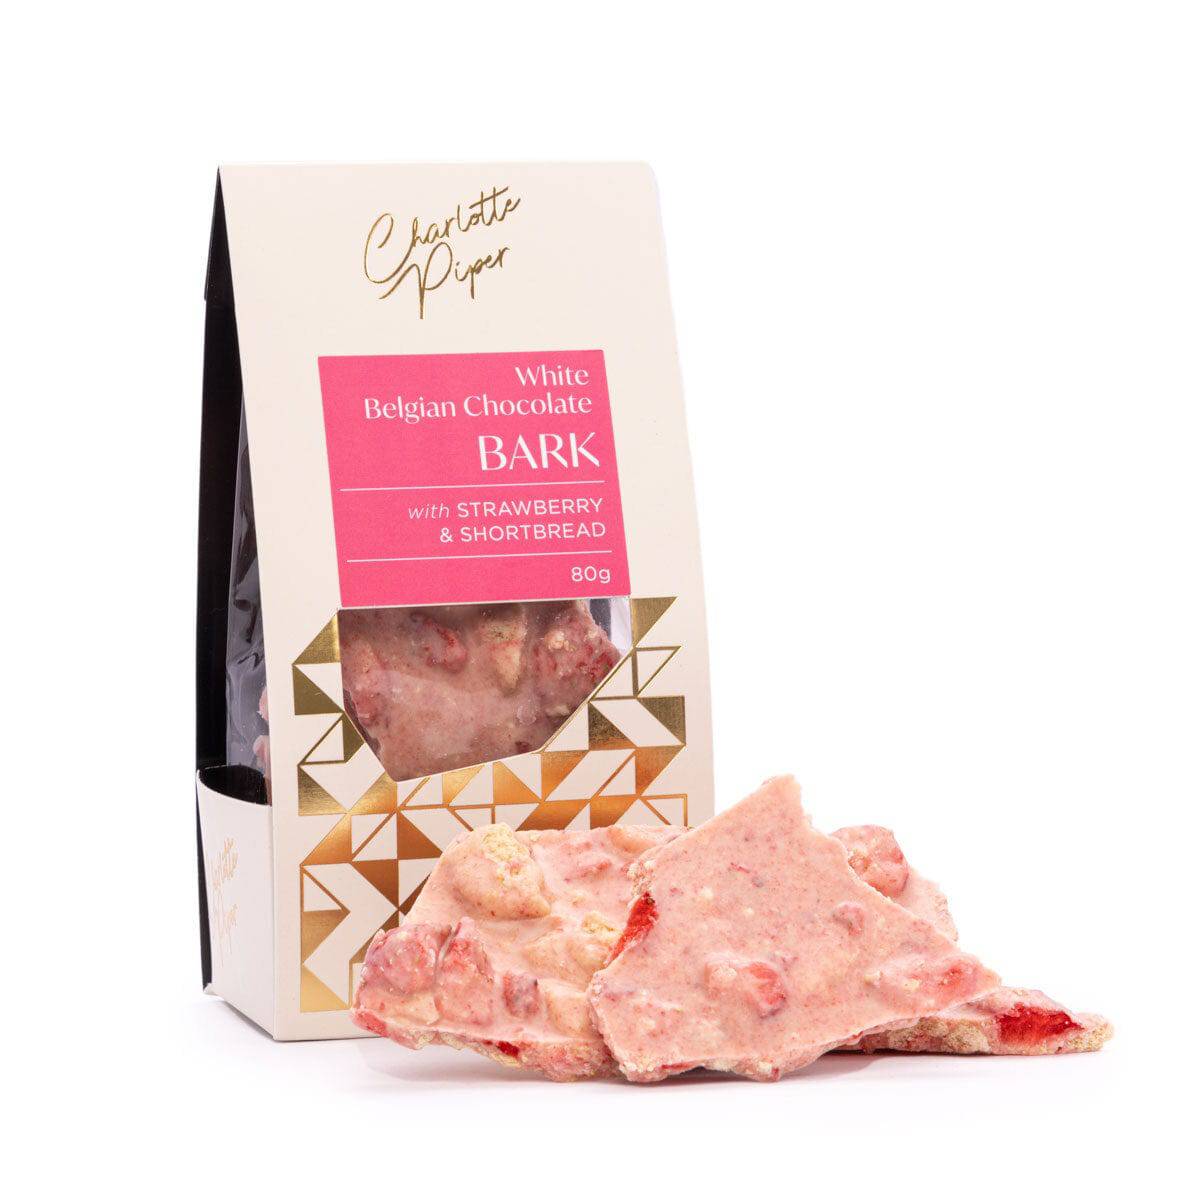 BLOOMHAUS MELBOURNE White Belgian Chocolate Bark with Strawberrry and Shortbread Charlotte Piper Chocolate Bark